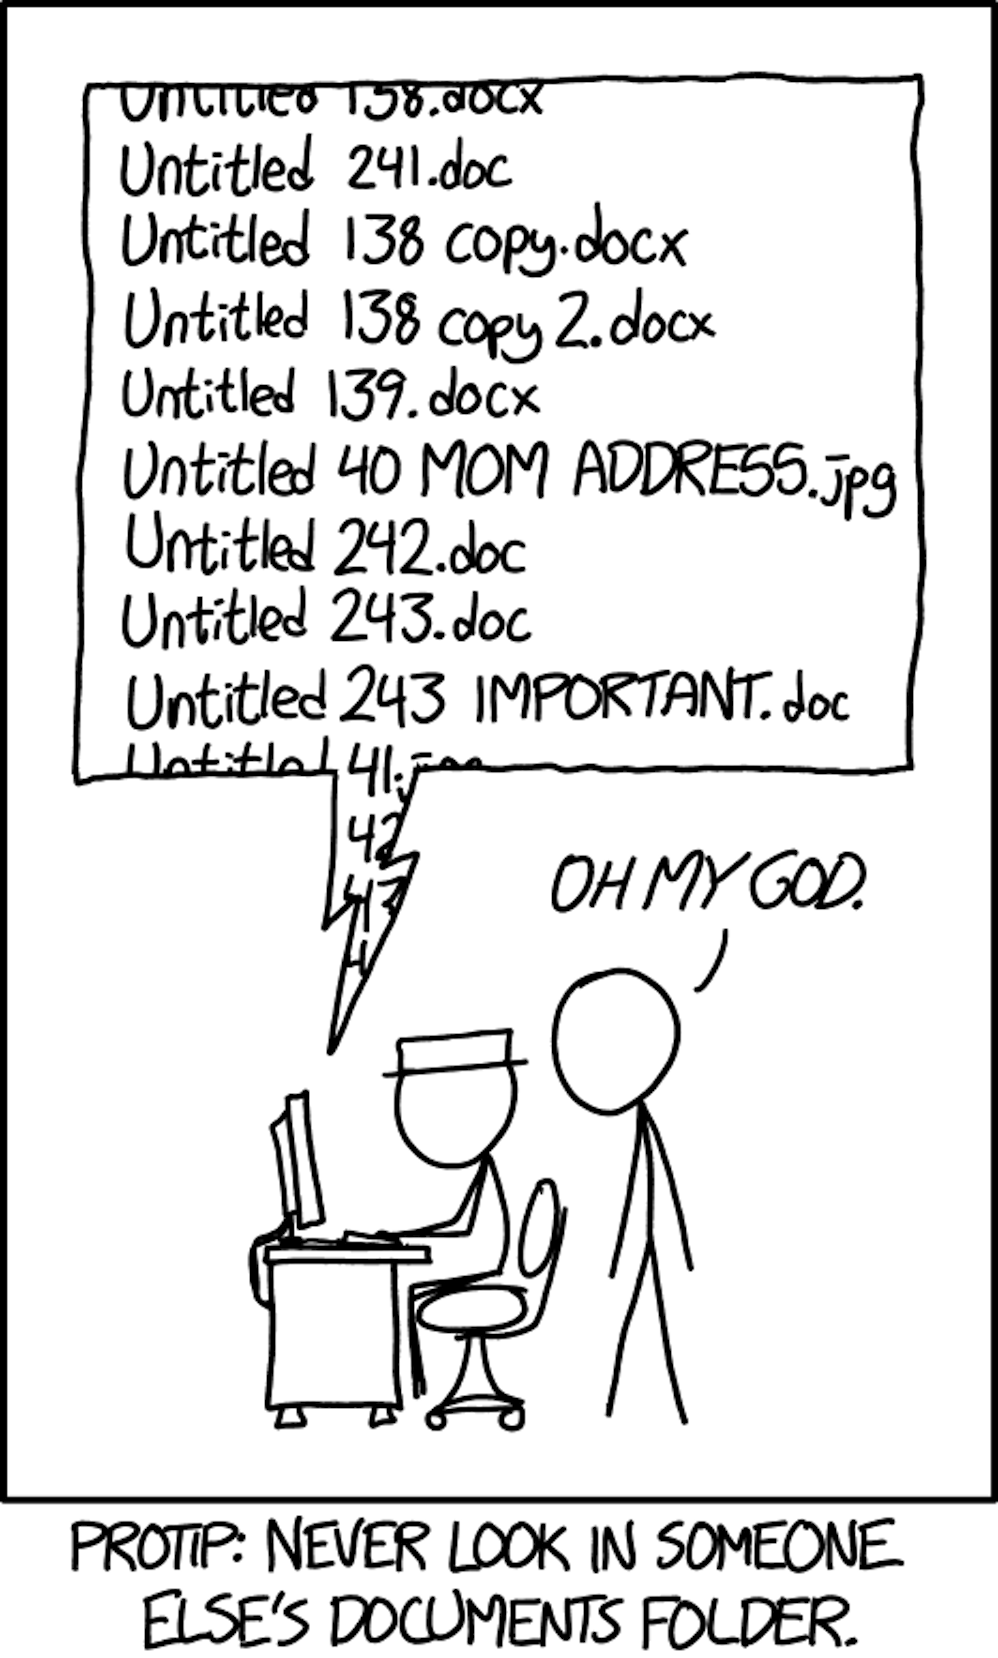 Poor file management creates chaos! By xkcd (https://xkcd.com/1459). Shared under CC BY-NC 2.5